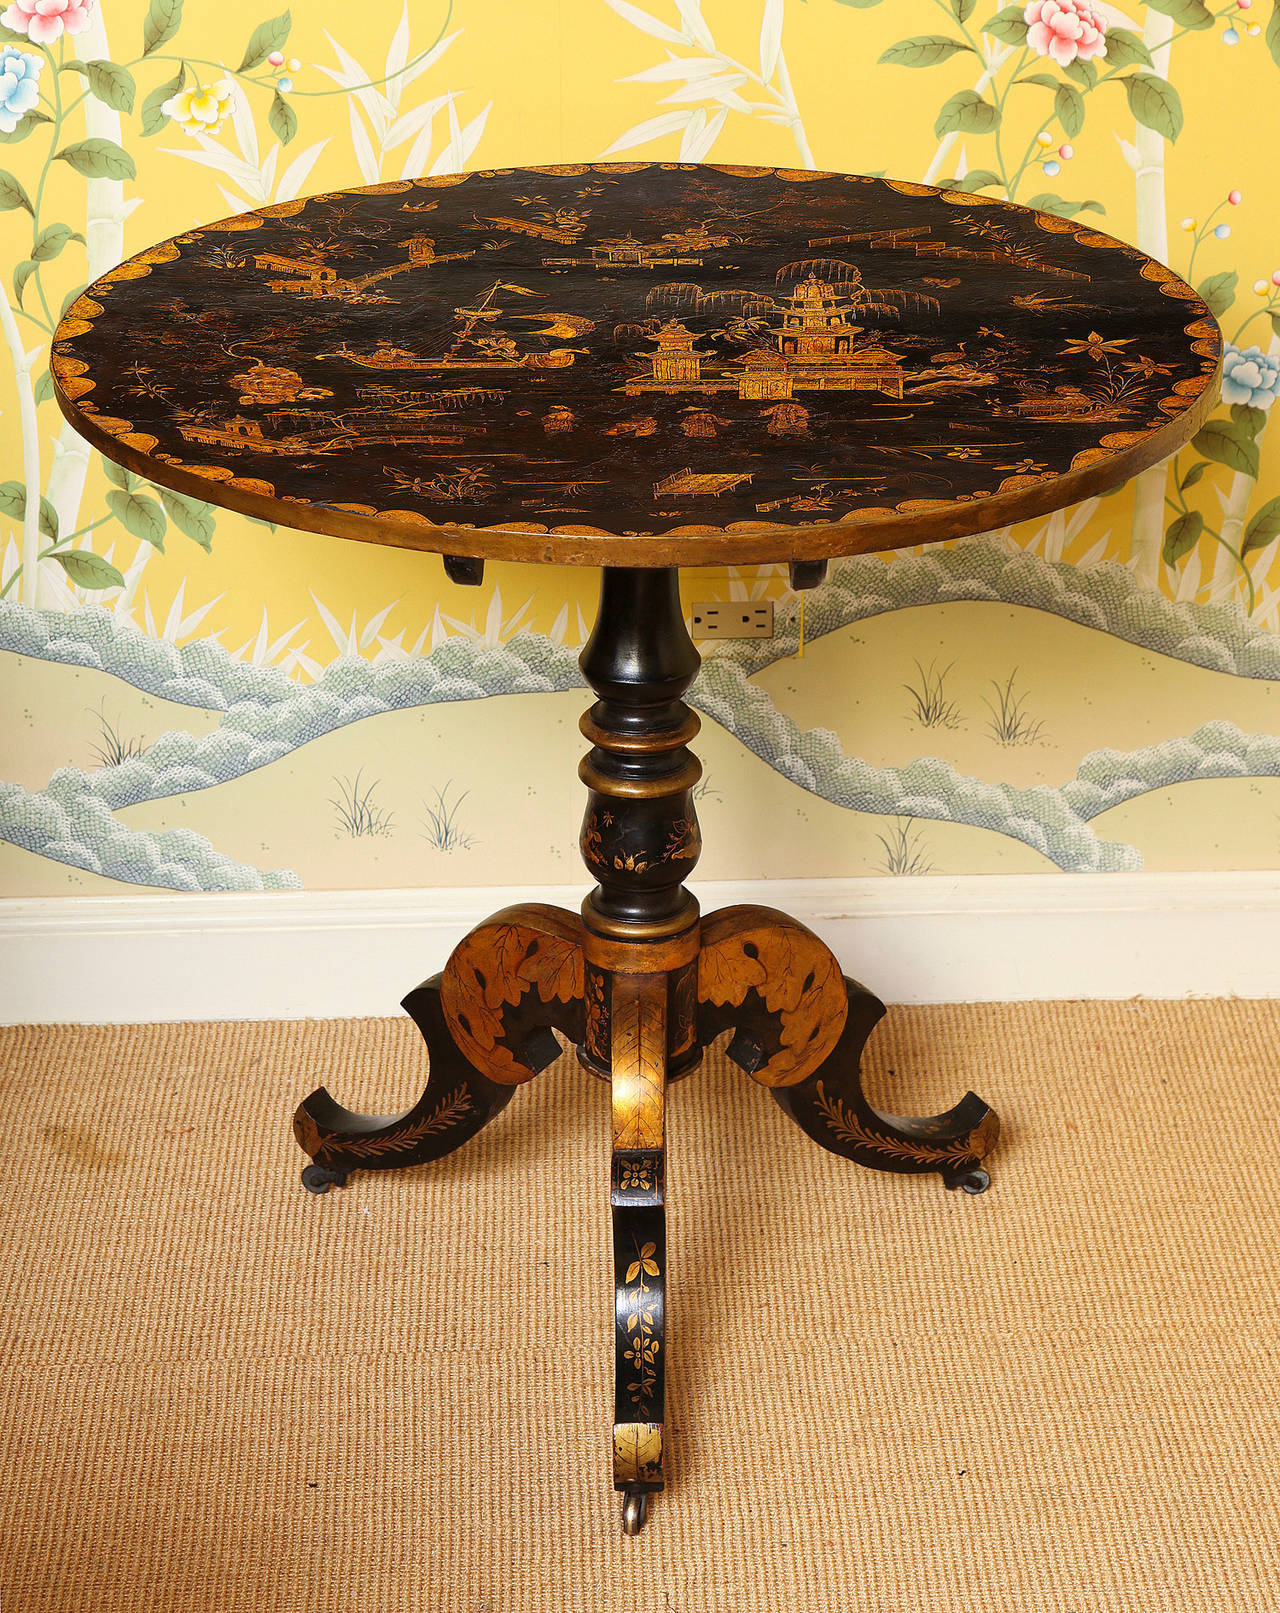 Fine Japanned chinoiserie circular tripod tilt-top table, decorated in gold, polychrome and black with scenes of a boat with figures and figures in landscapes and pavilions, etc. within a gilt scalloped perimeter, on a turned baluster standard with